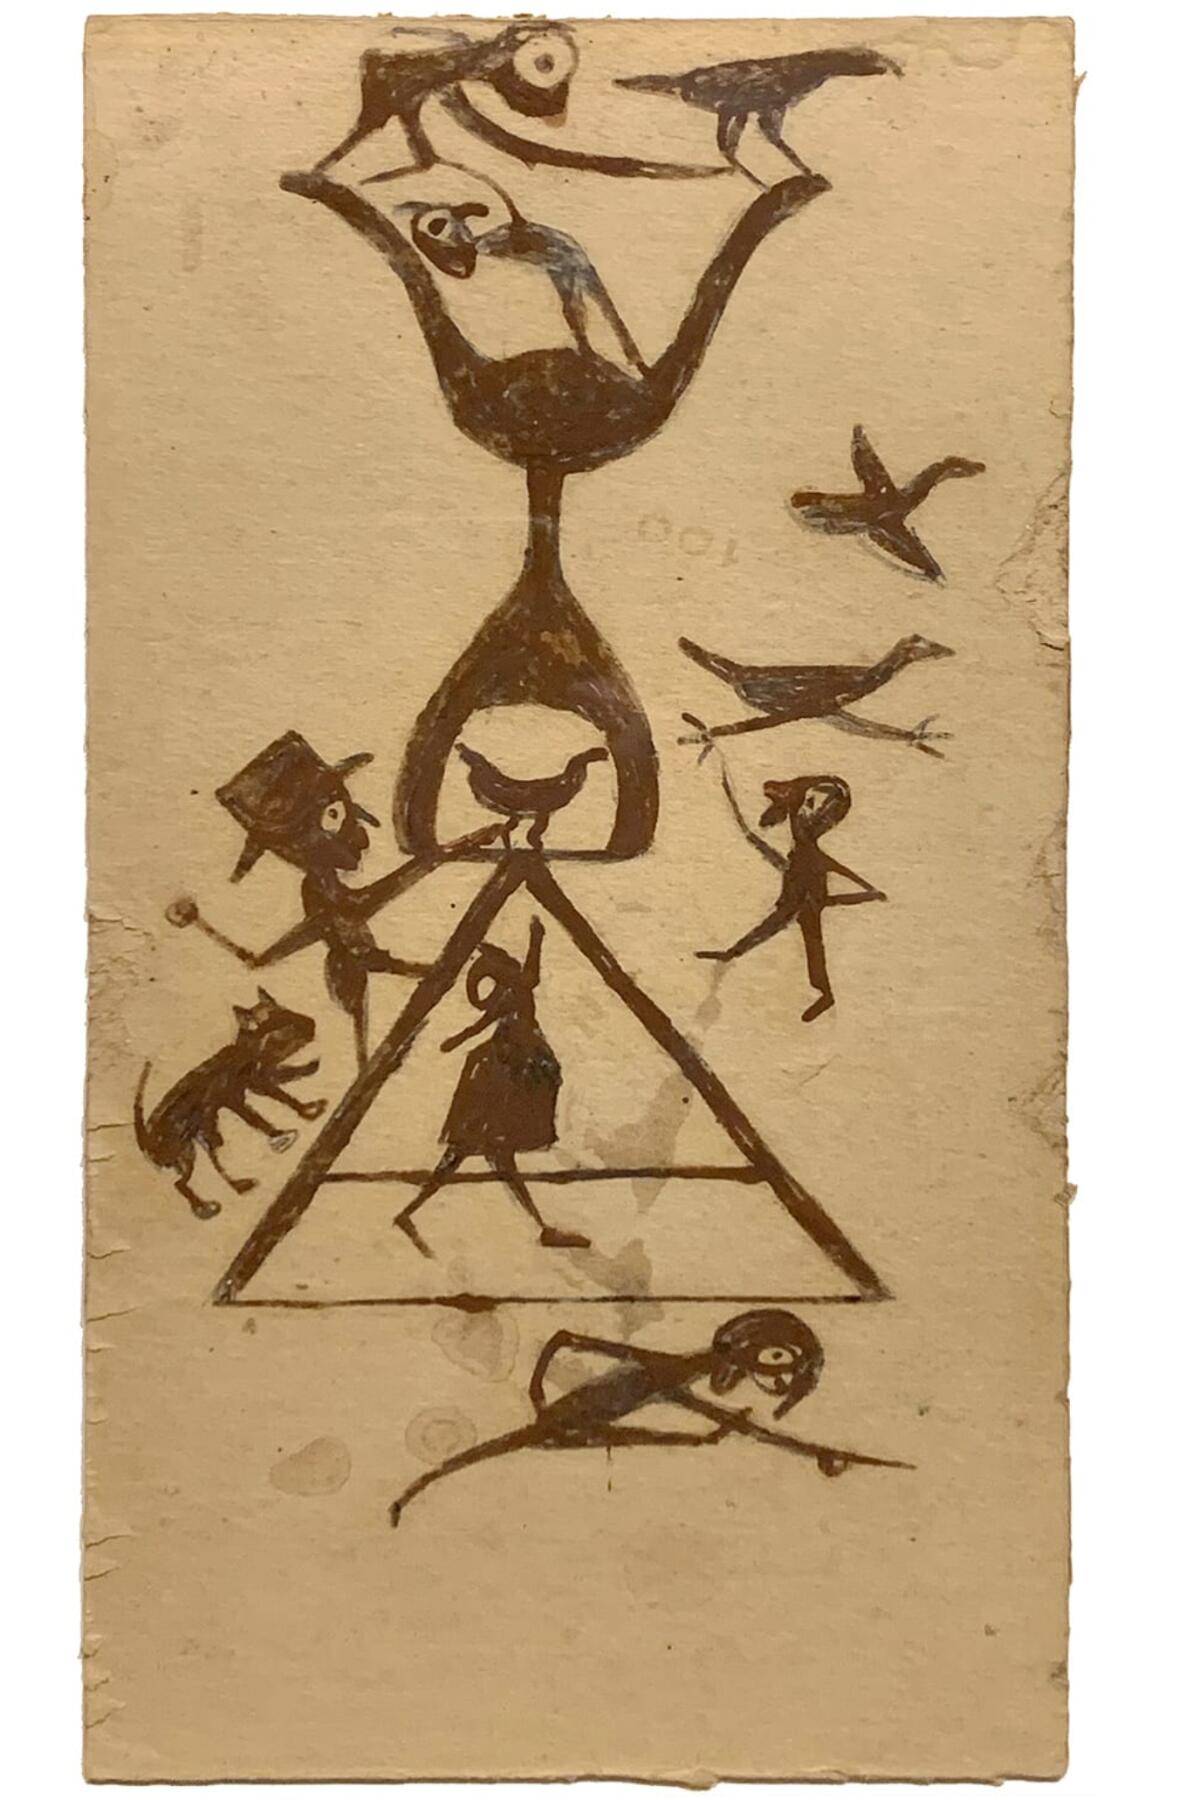 Bill Traylor, Untitled (Construction with Figures) about 1939-42